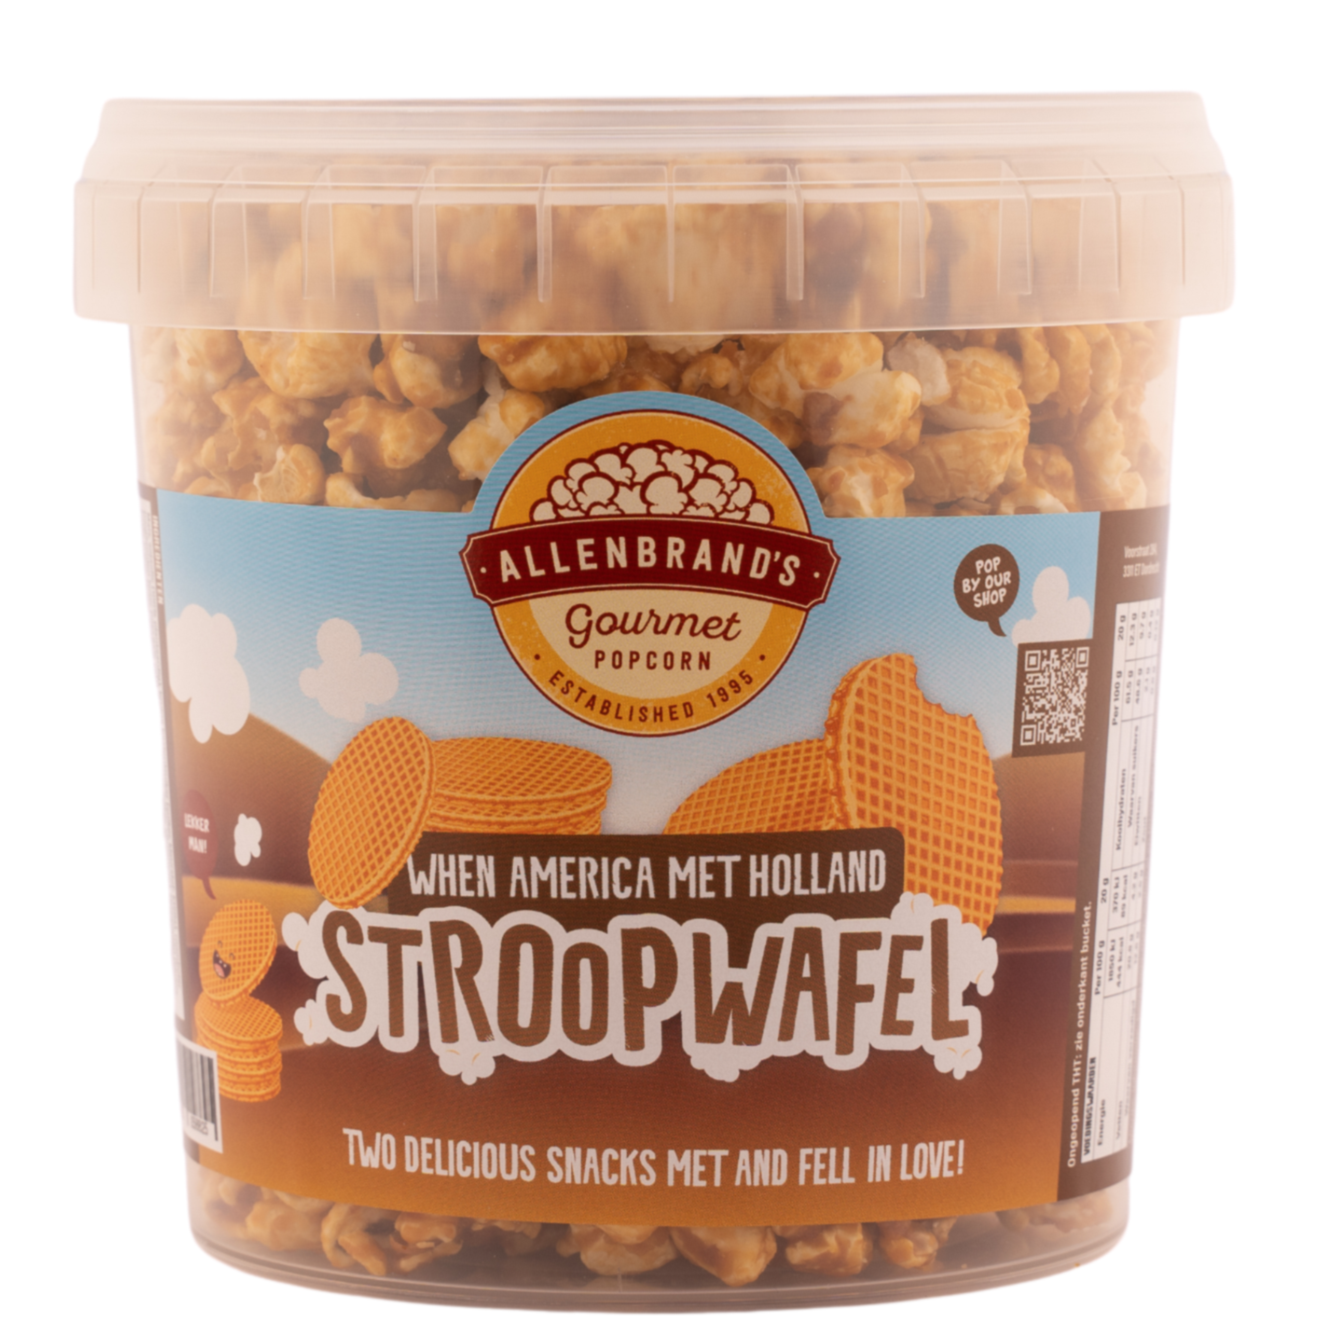 Stroopwafel: Two delicious snacks met and fell in love.